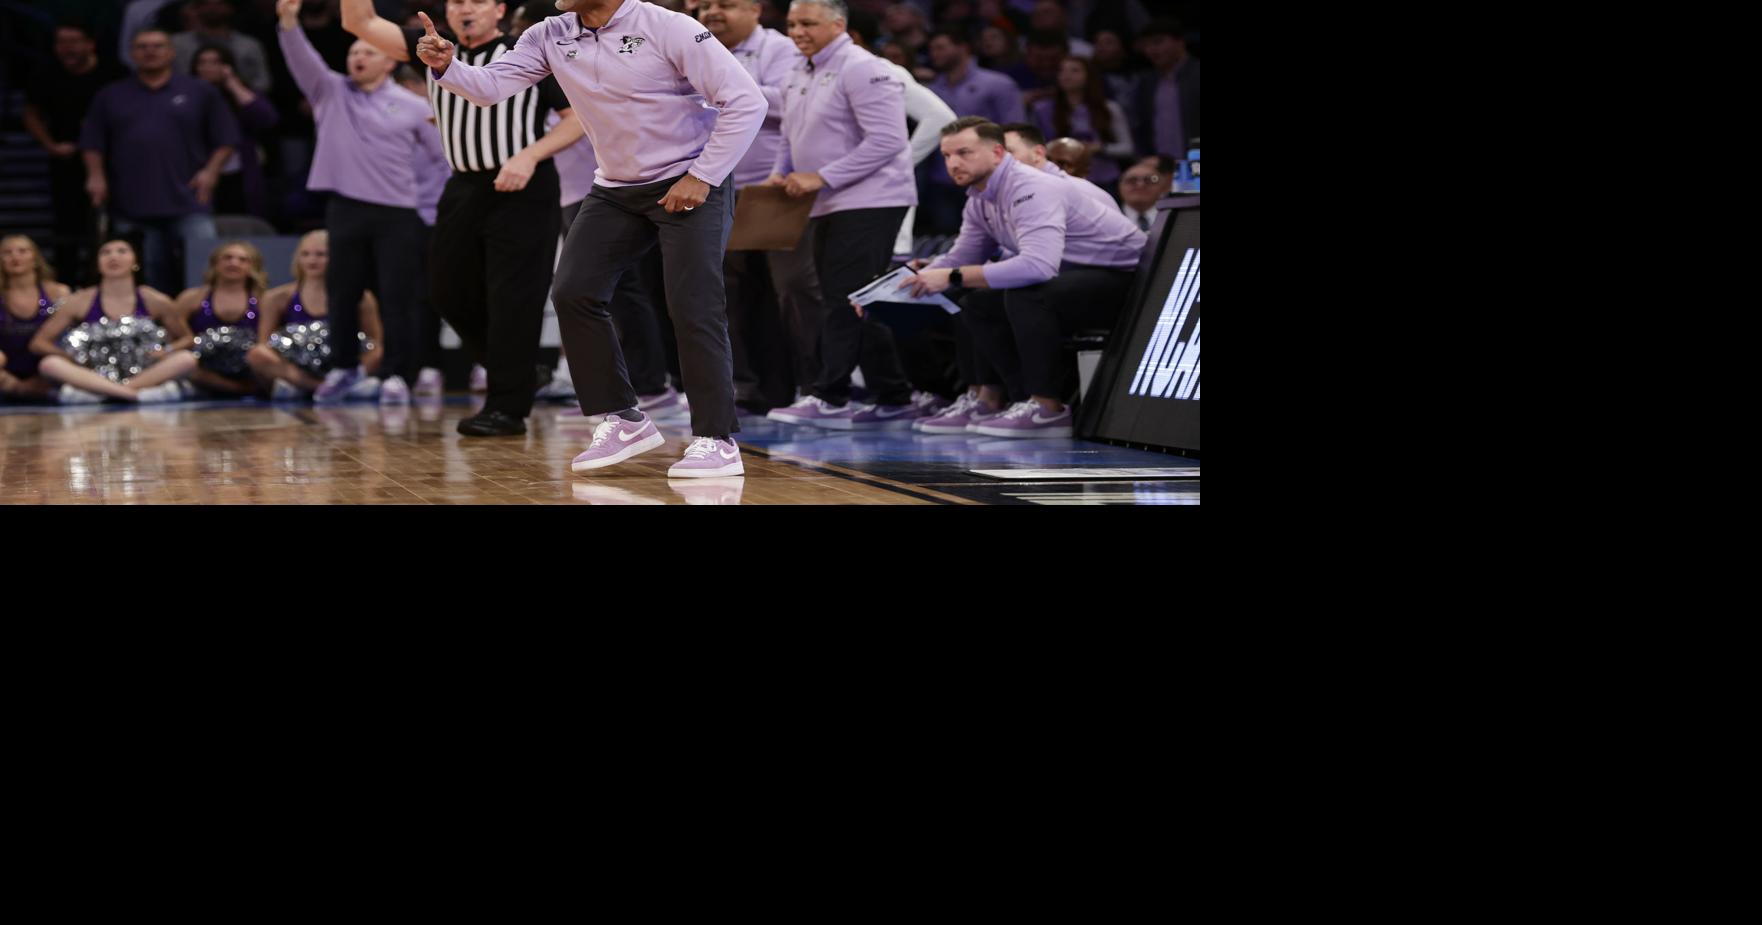 KState men selected to play in Bahamas tournament KState Sports